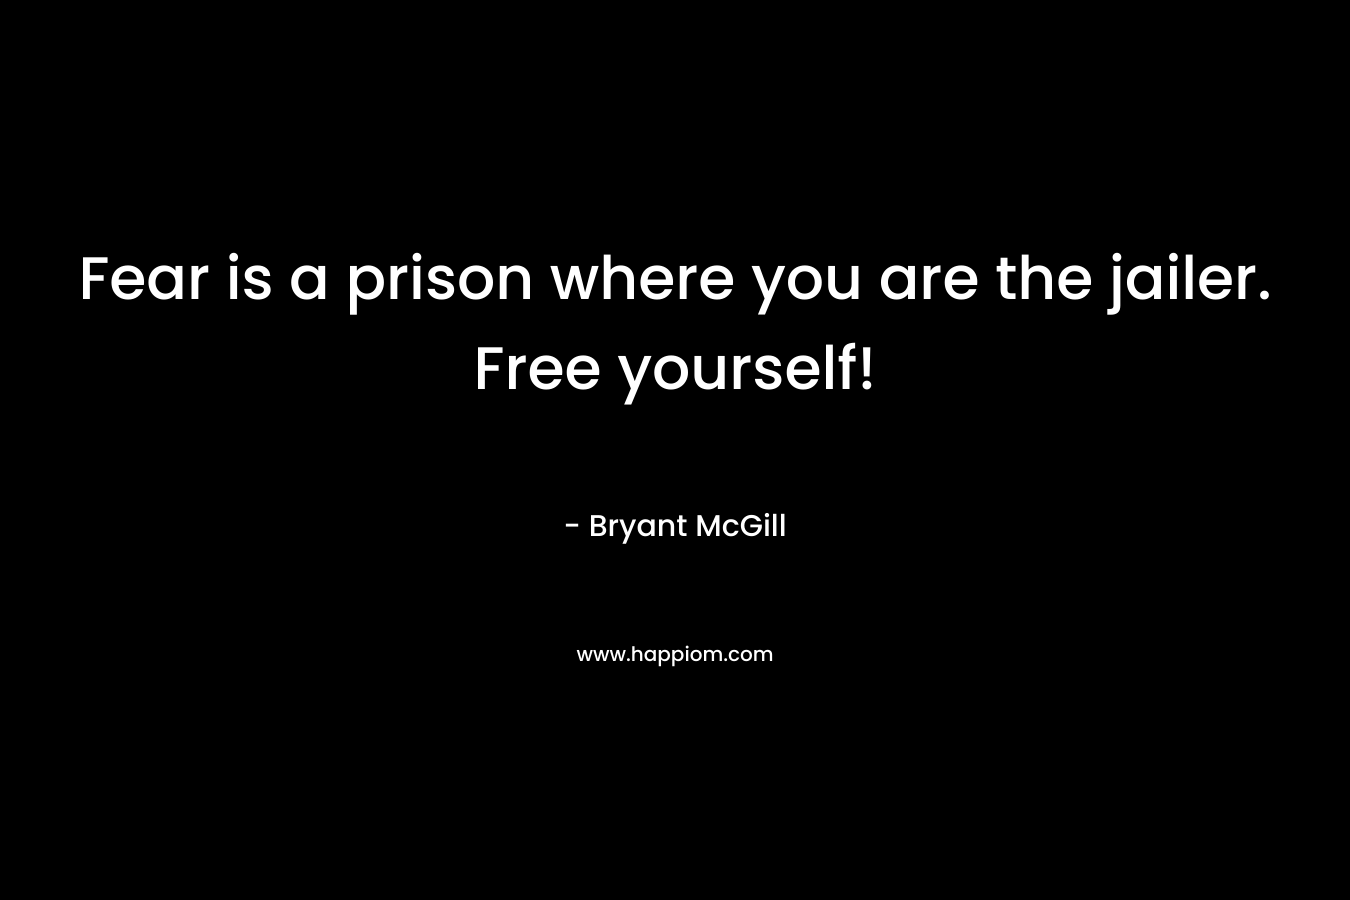 Fear is a prison where you are the jailer. Free yourself!